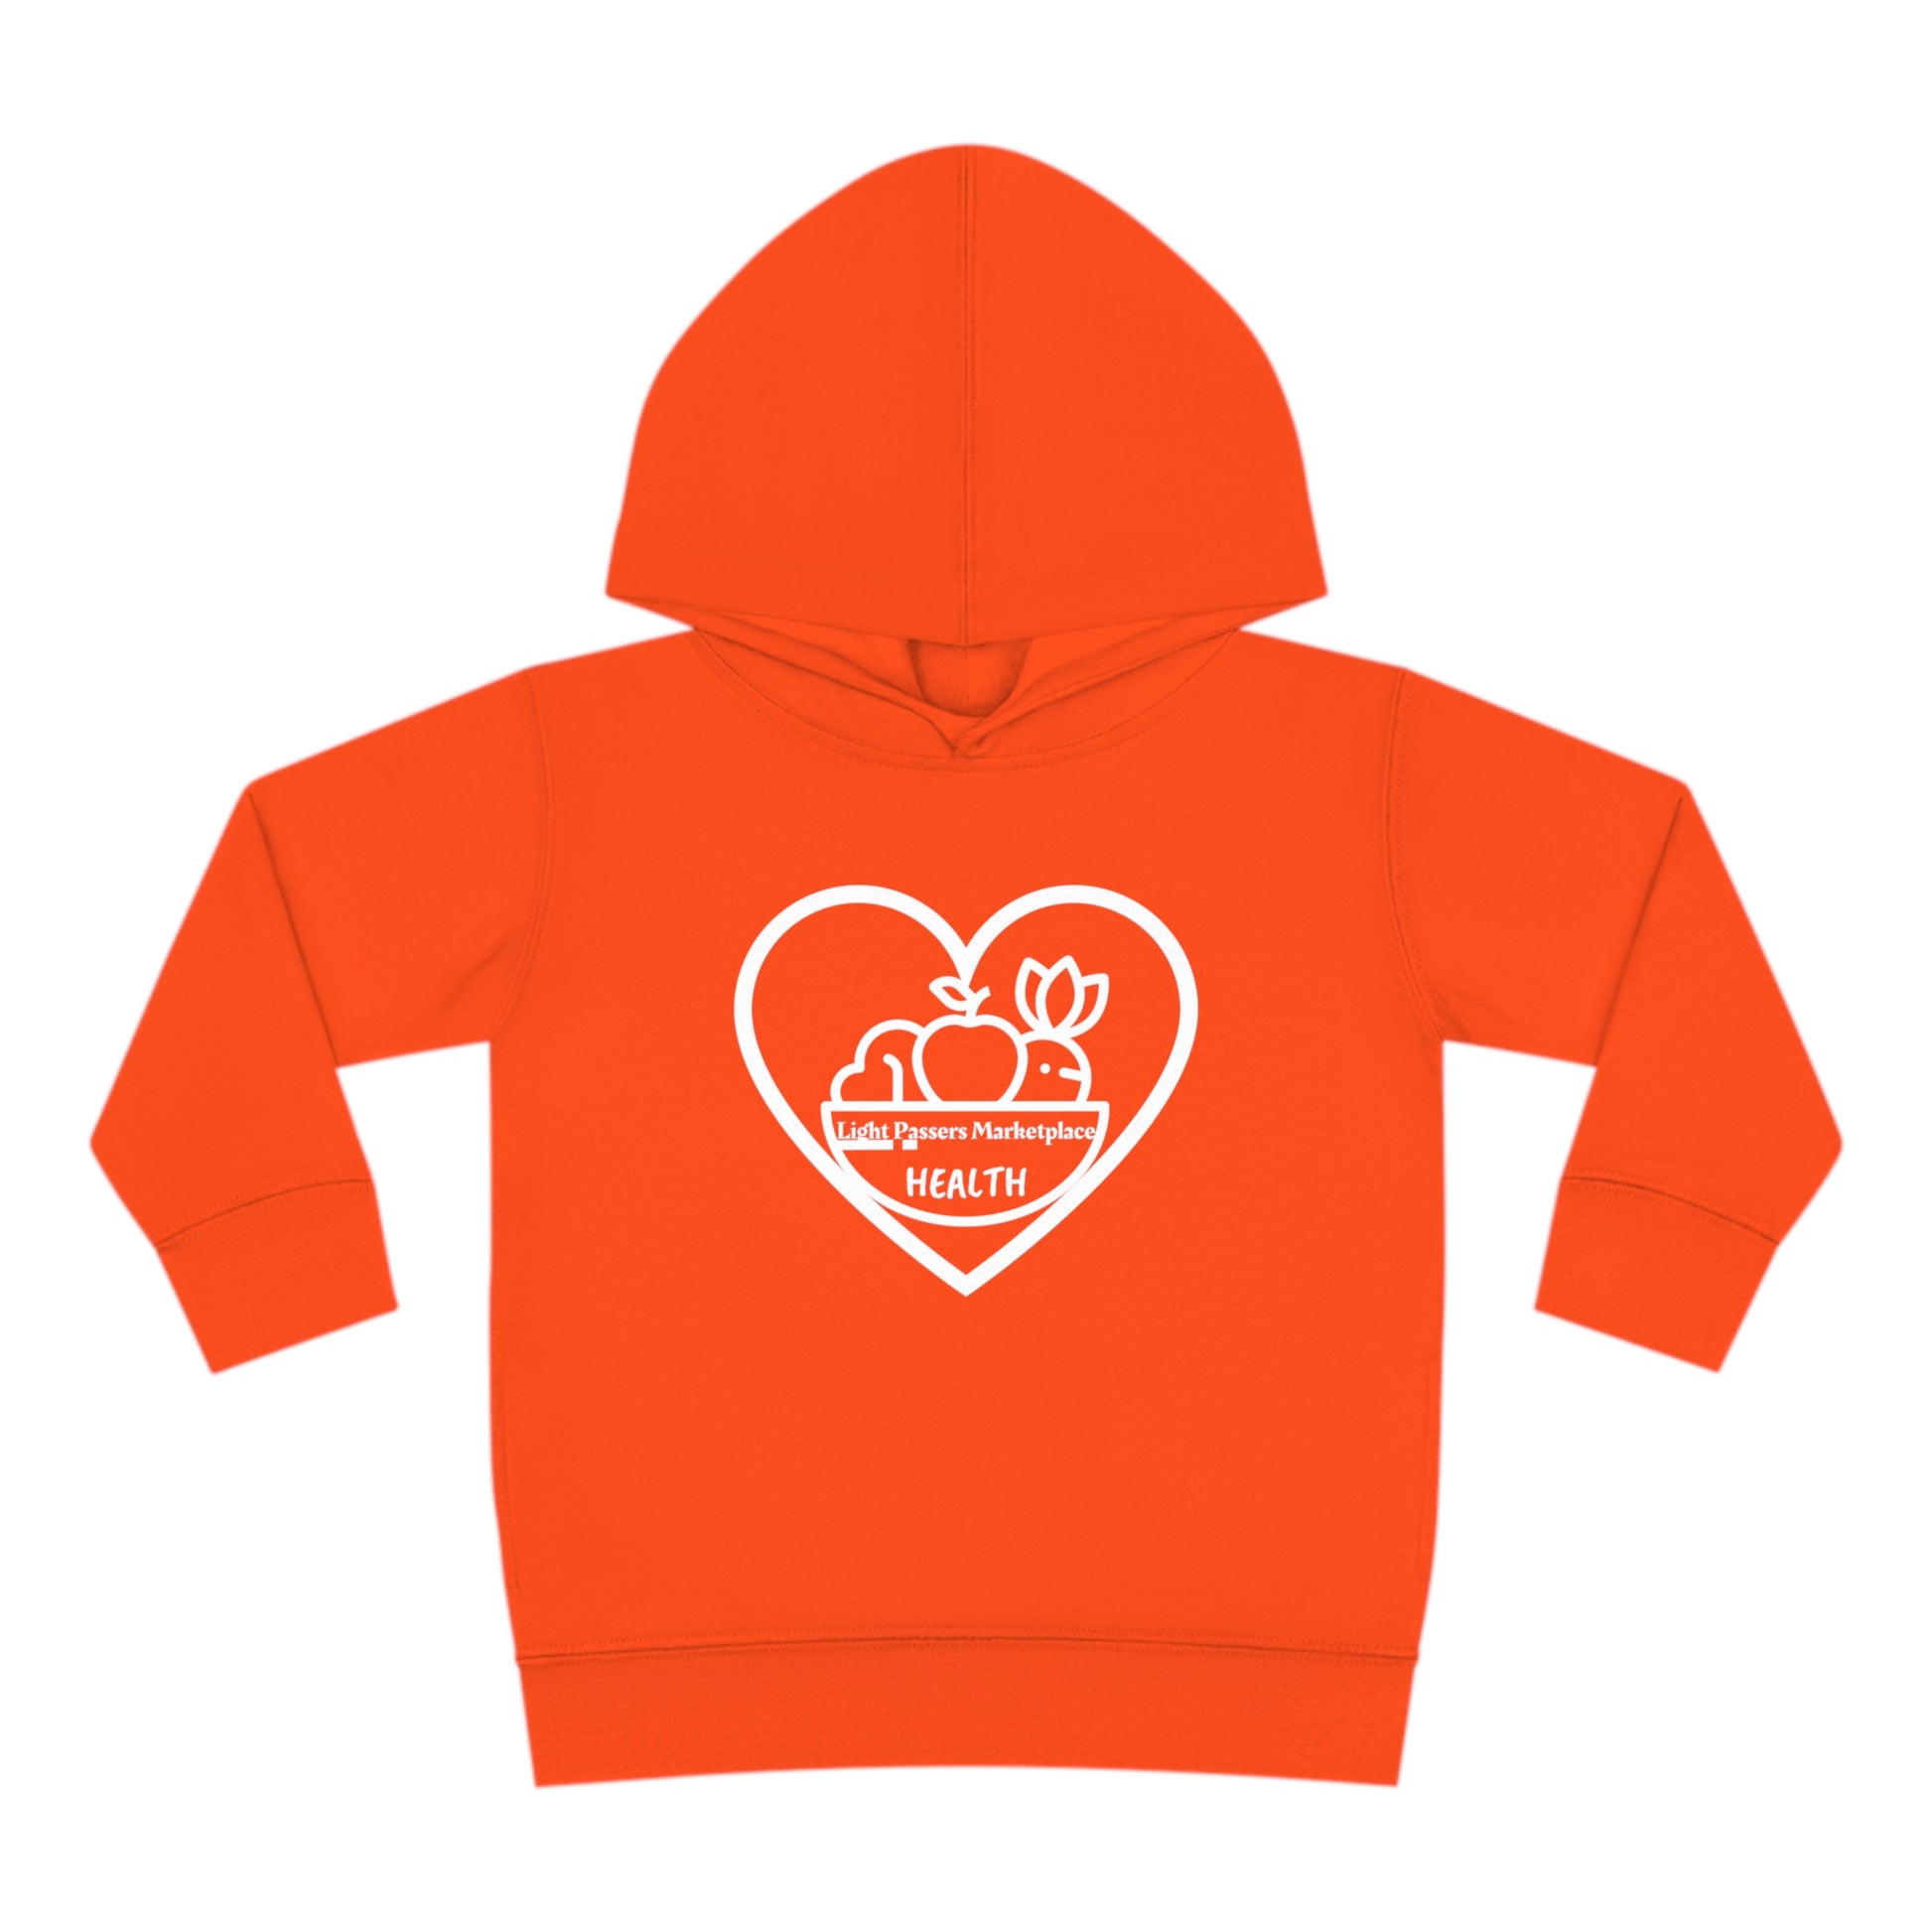 A toddler hoodie featuring a heart, apples, and a logo design. Made of 60% cotton, 40% polyester with a jersey-lined hood, side seam pockets, and durable stitching for lasting comfort.